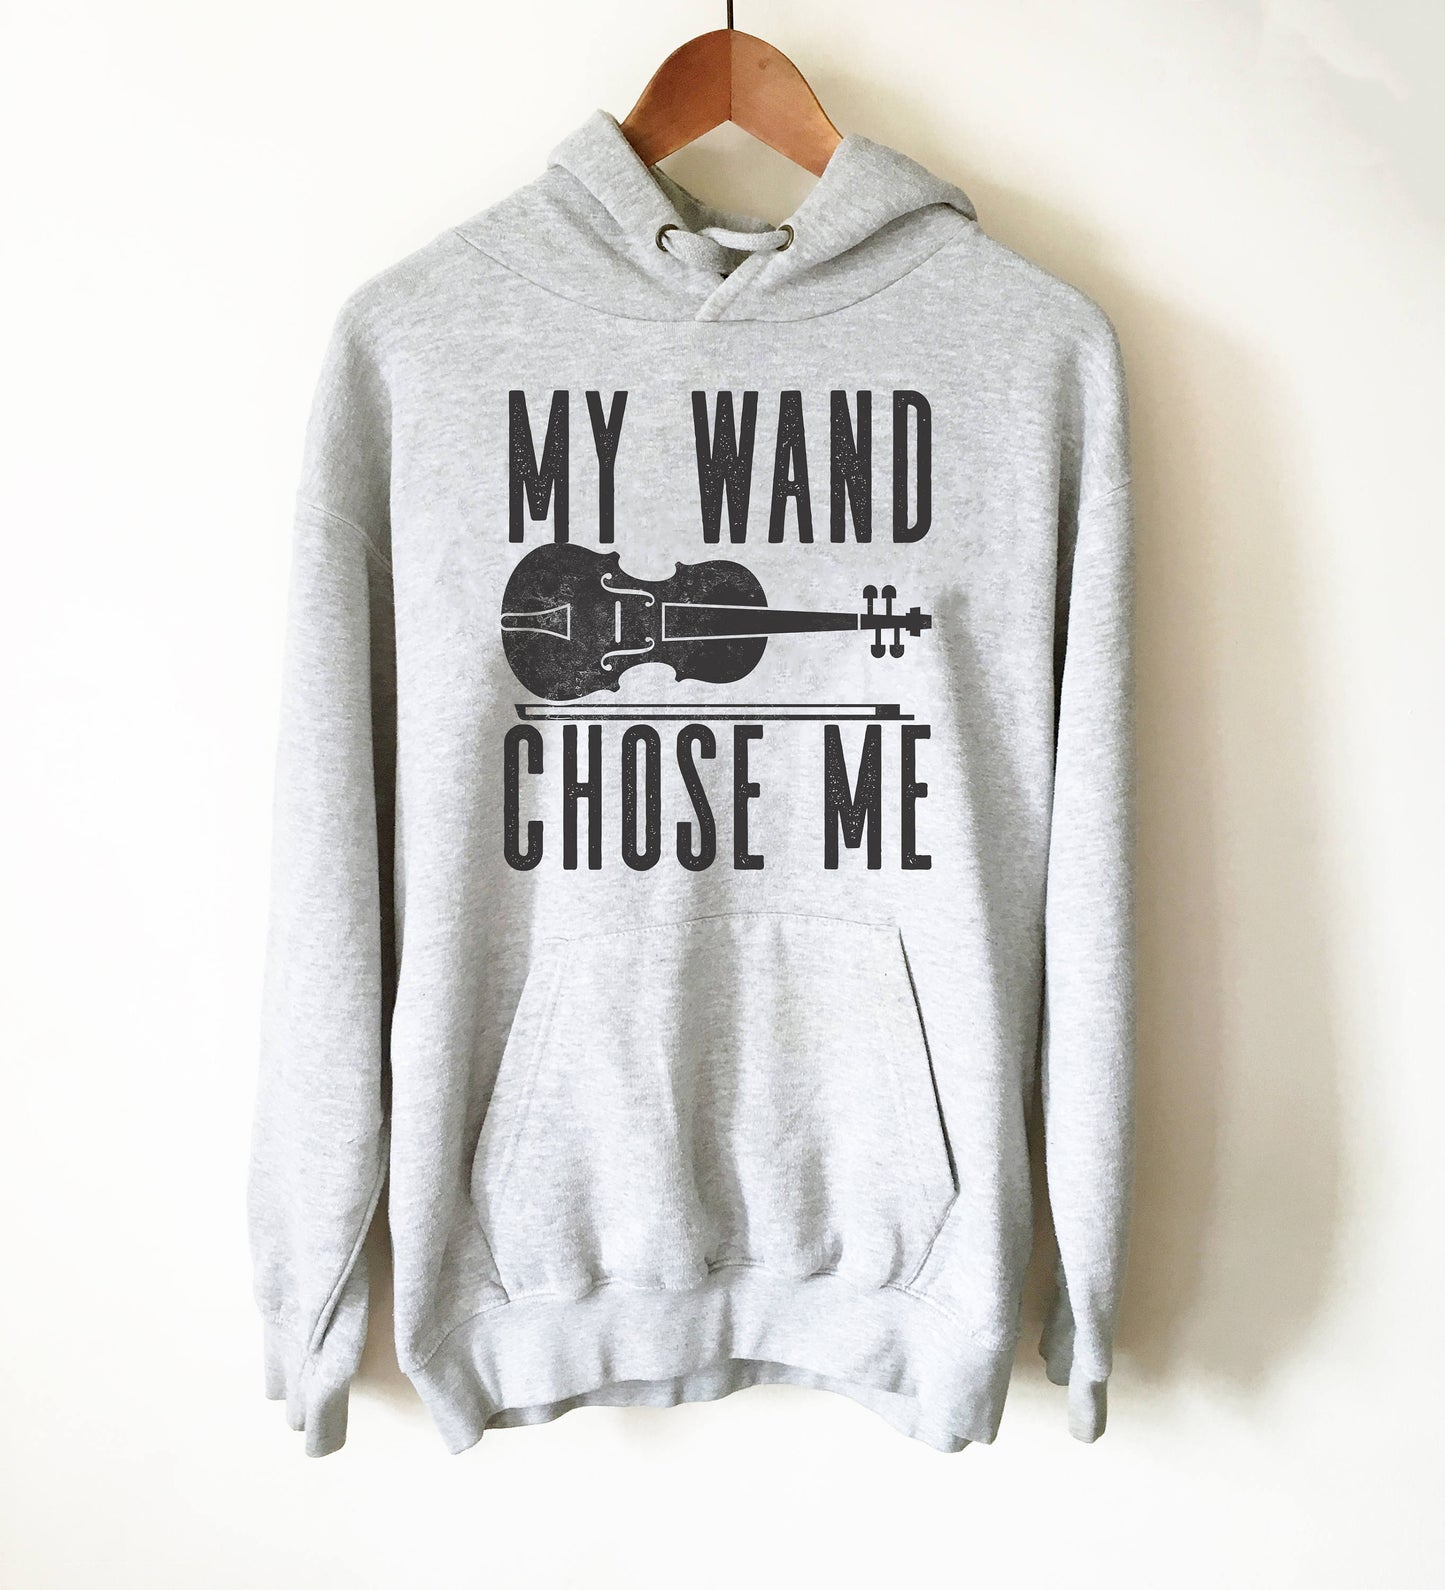 My Wand (Violin) Chose Me Unisex Hoodie - Violinist gift, Violin shirt, Violin gifts, Music teacher gift, Musician gift, Orchestra hoodie